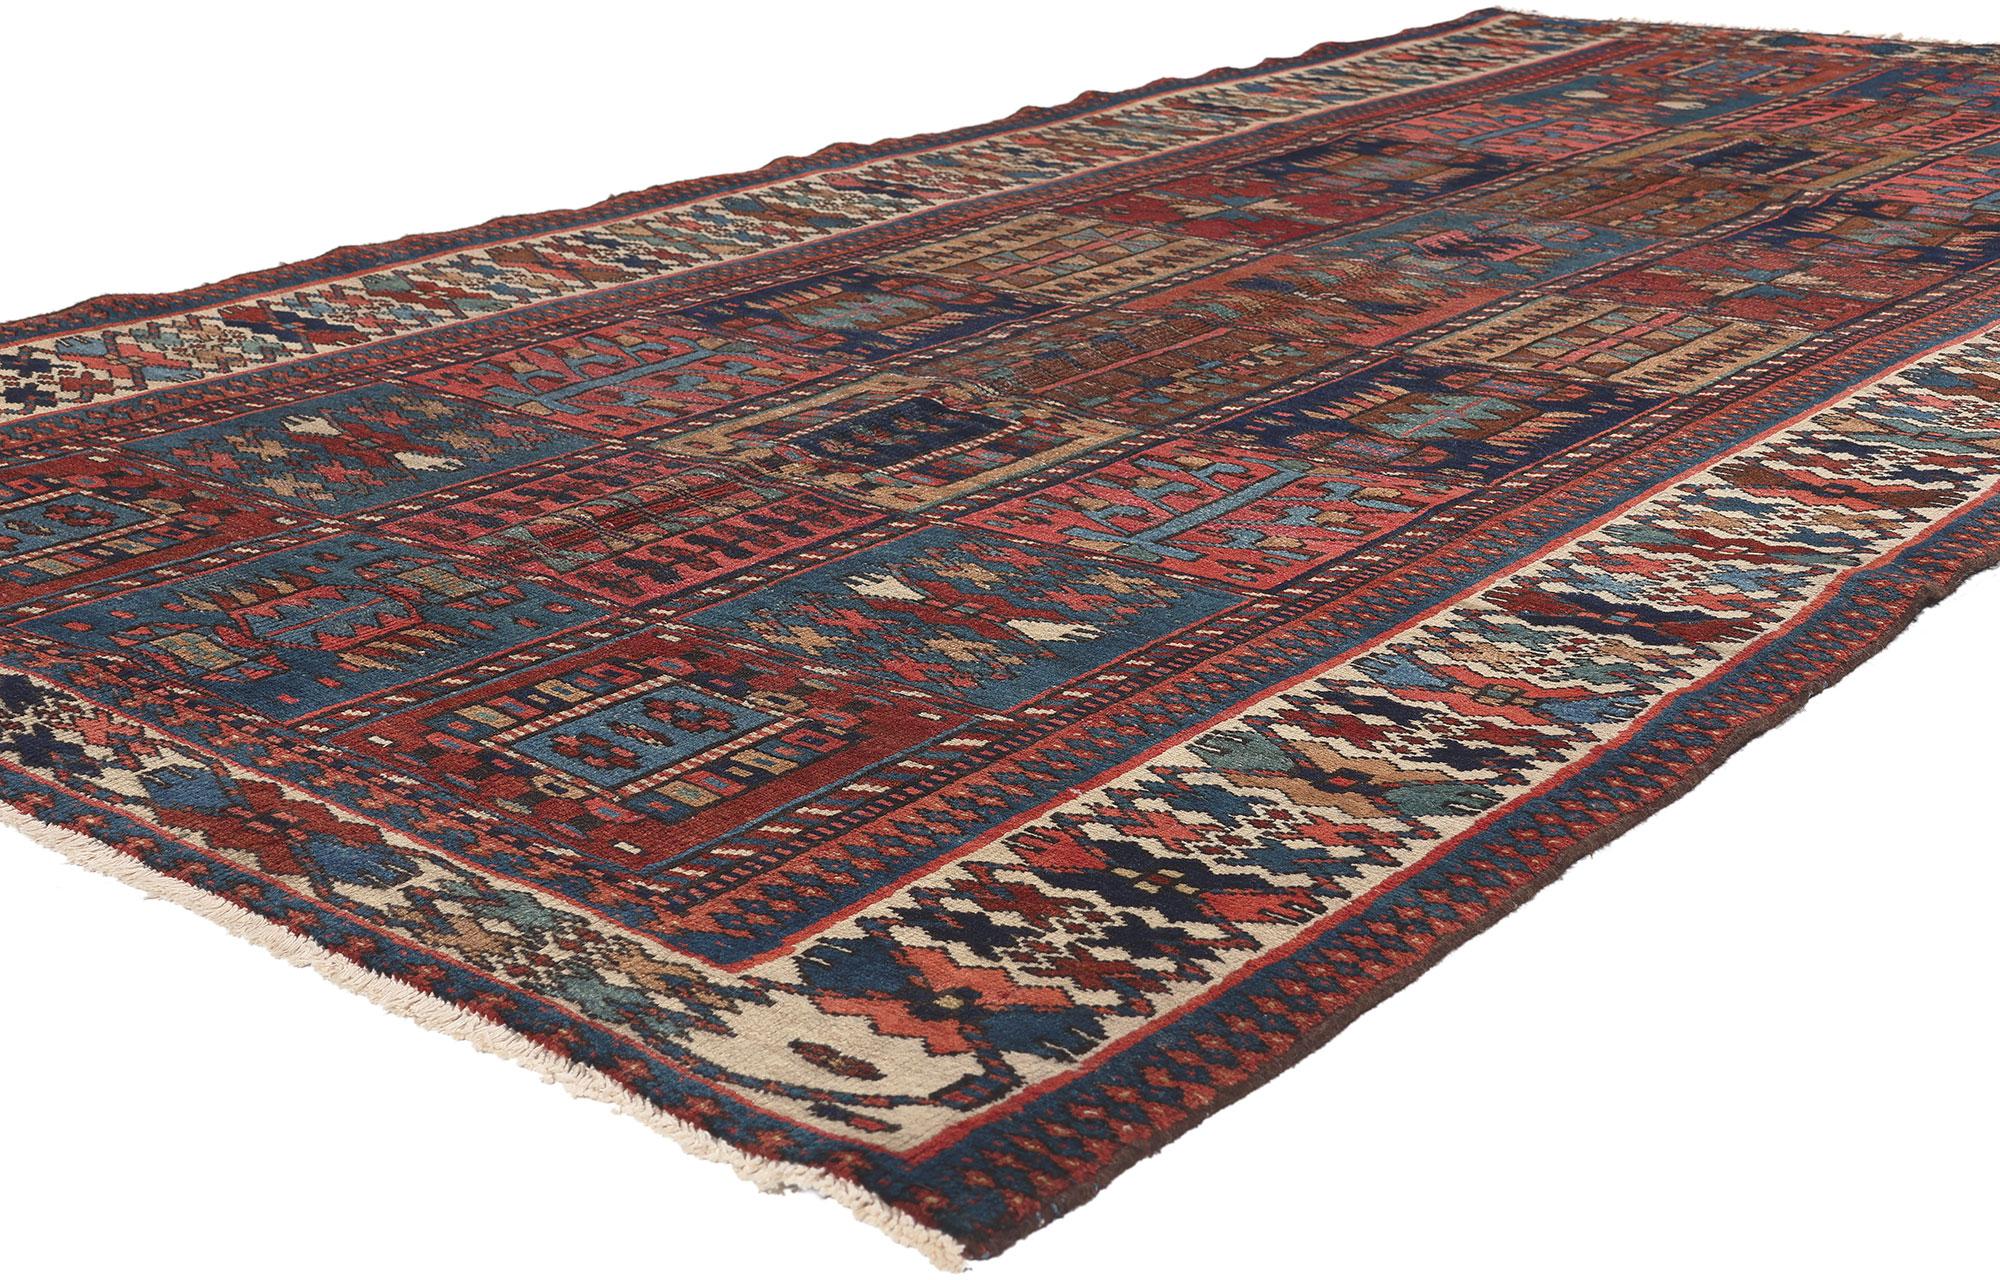 75279 Antique Persian Bakhtiari Rug, 05'01 x 10'04.
Nomadic charm meets Biophilic Design in this antique Persian Bakhatiari rug. The four seasons garden design and rich earthy hues woven into this piece work together creating a warm and welcoming